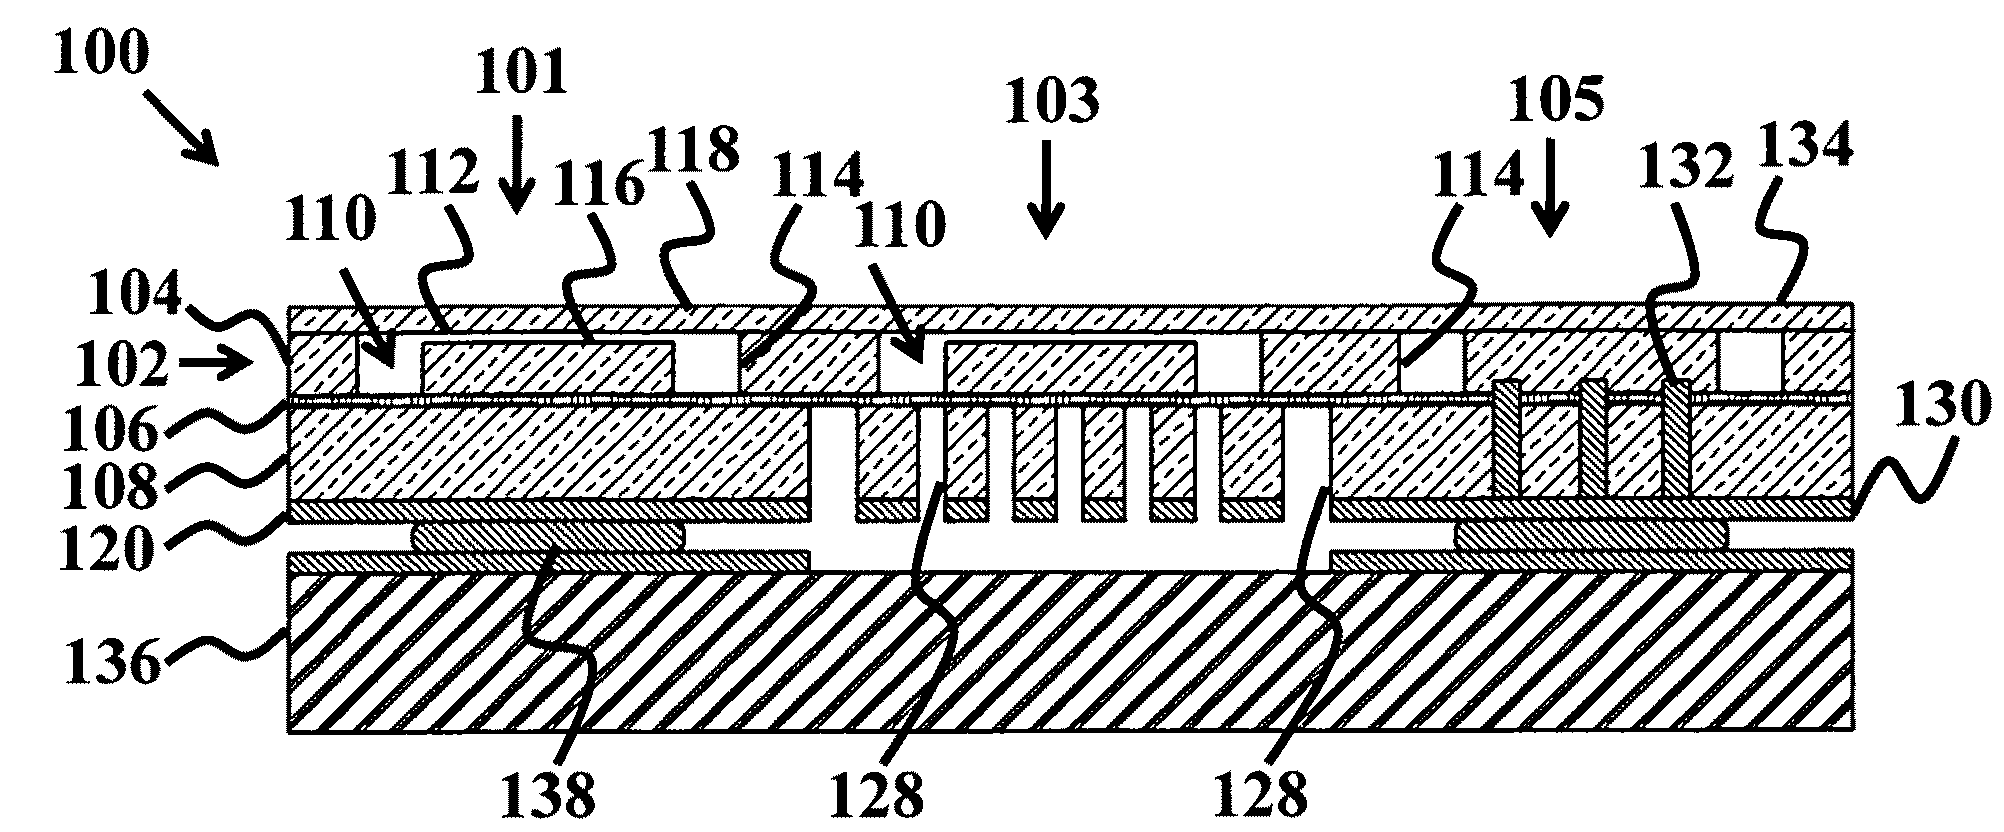 Direct wafer bonded 2-D CUMT array